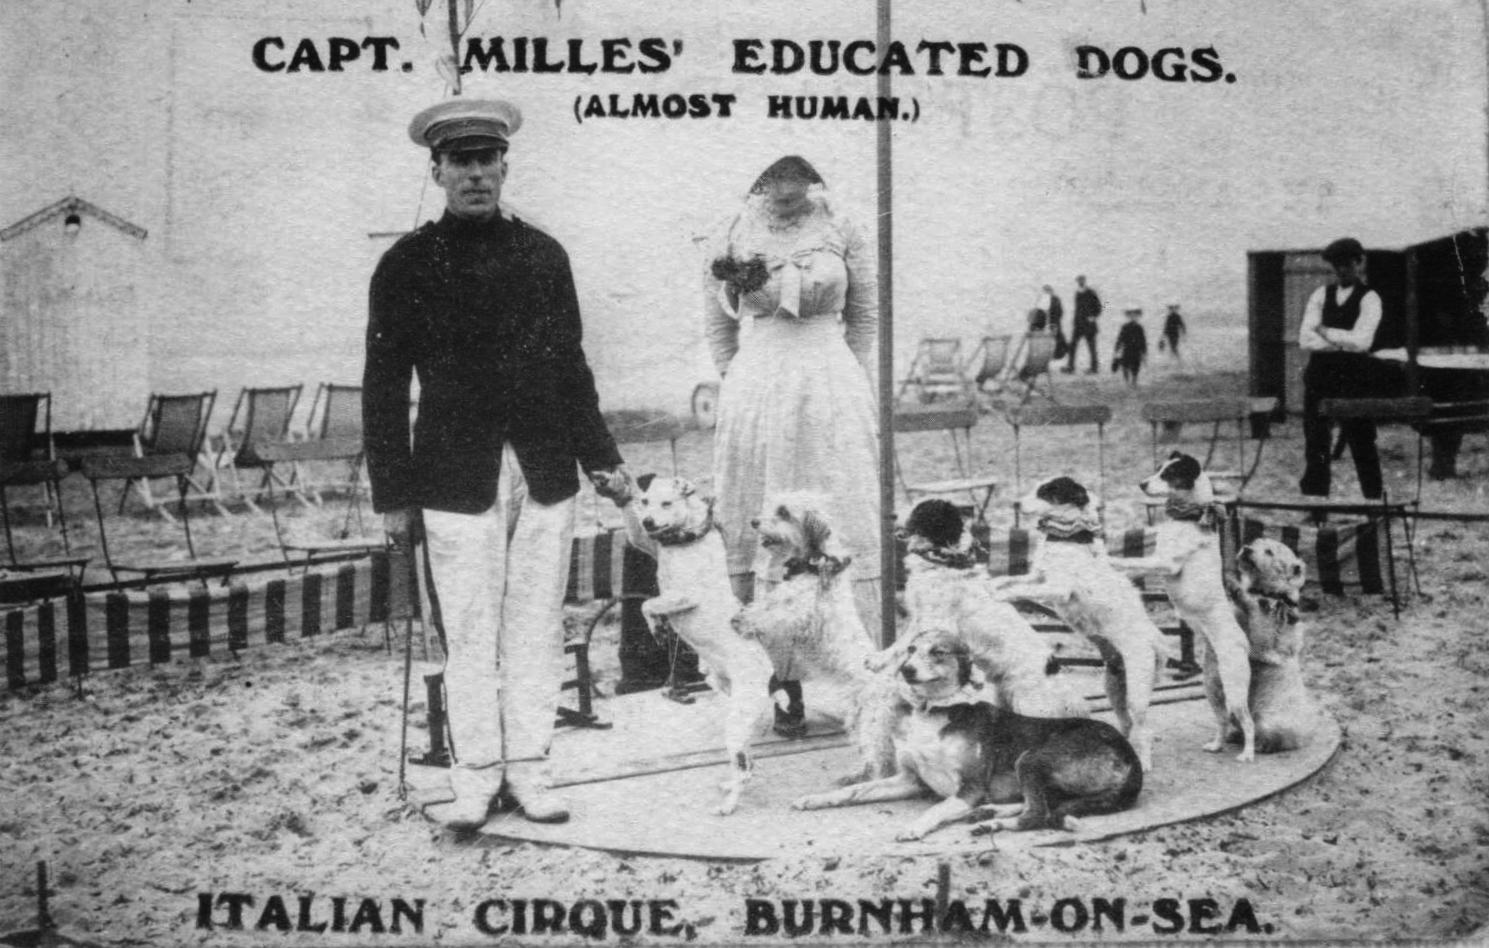 Capt Milles' Educated Dogs